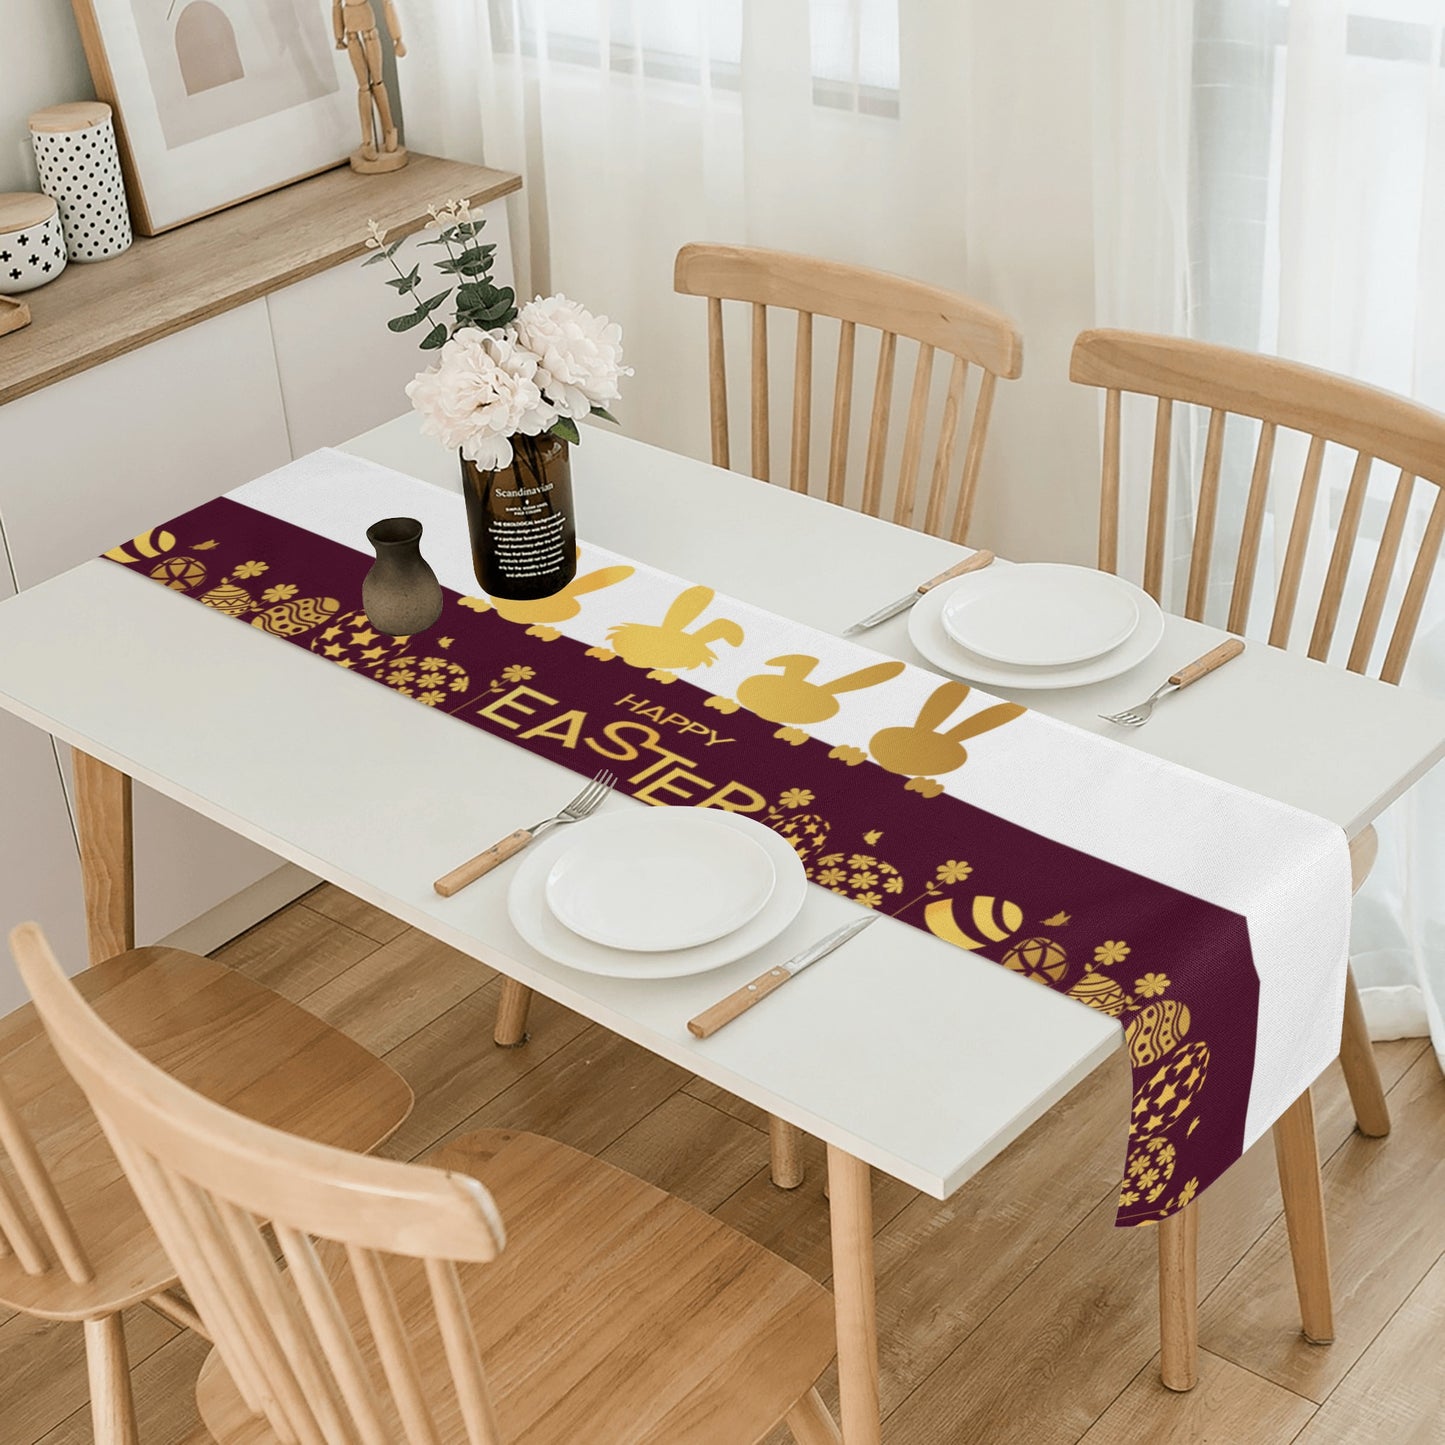 Bring Character and Charm to Your Table with These 4 Little Bunnies on The Gorgeous Table Runner